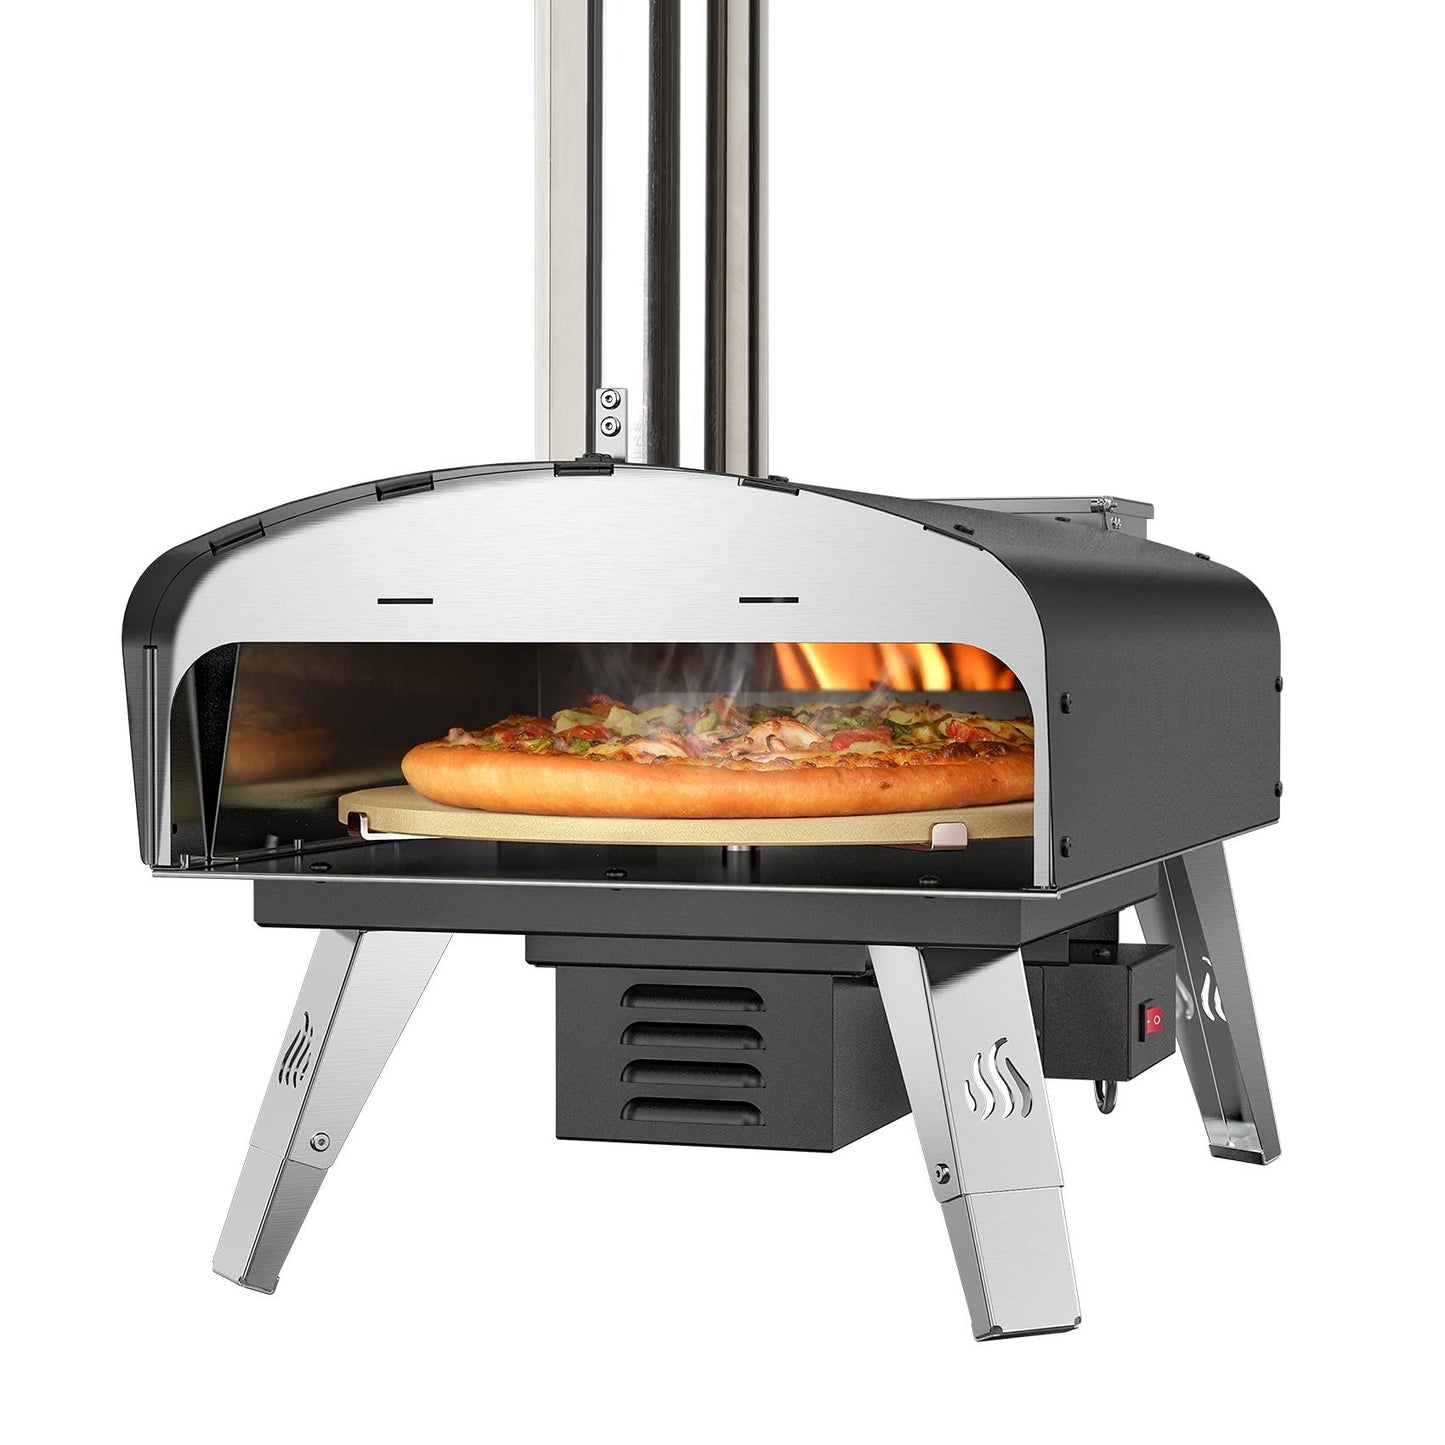 Mimiuo Outdoor Pizza Oven Wood Pellet Fired Pizza Stove with Automatic Rotating System, Pizza Stone, Pizza Peel and Carry Bag (Tisserie W-Oven Series) - Global Patent - CookCave